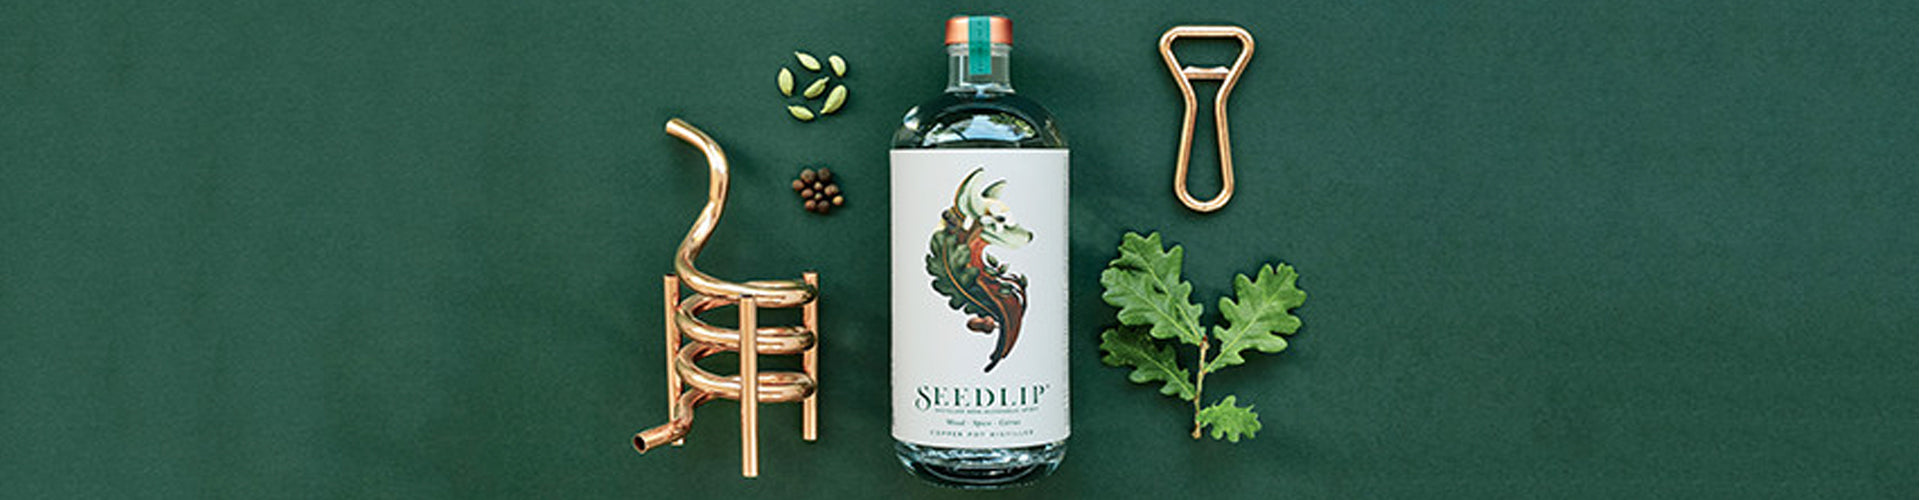 Seedlip Drinks The World's First Distilled Non-Alcoholic Spirits